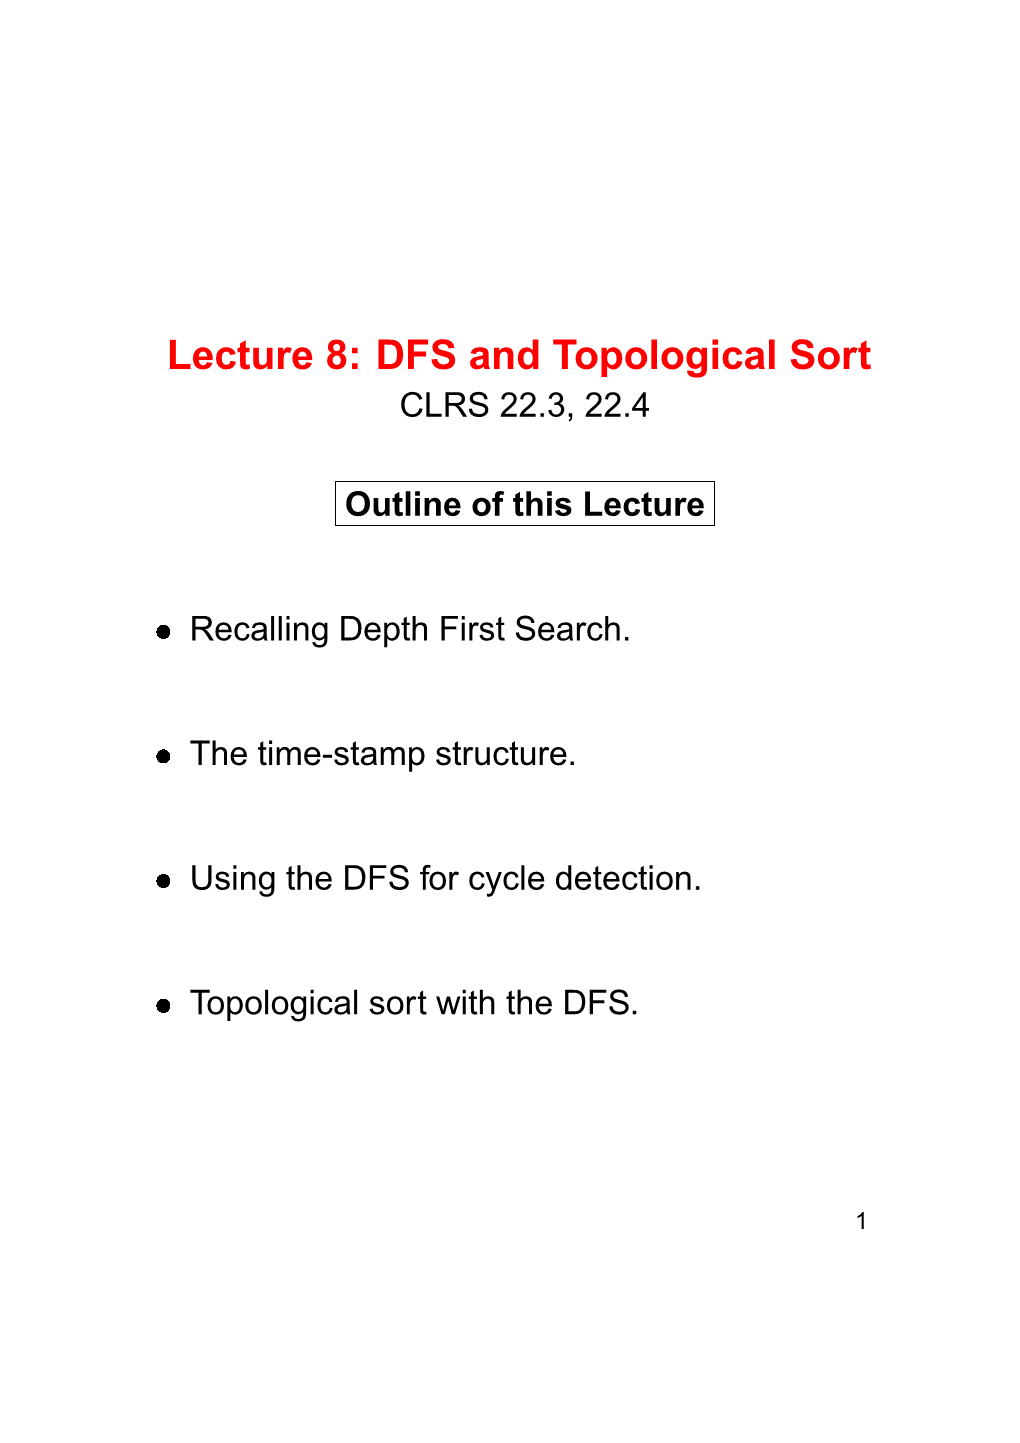 Lecture 8: DFS and Topological Sort CLRS 22.3, 22.4